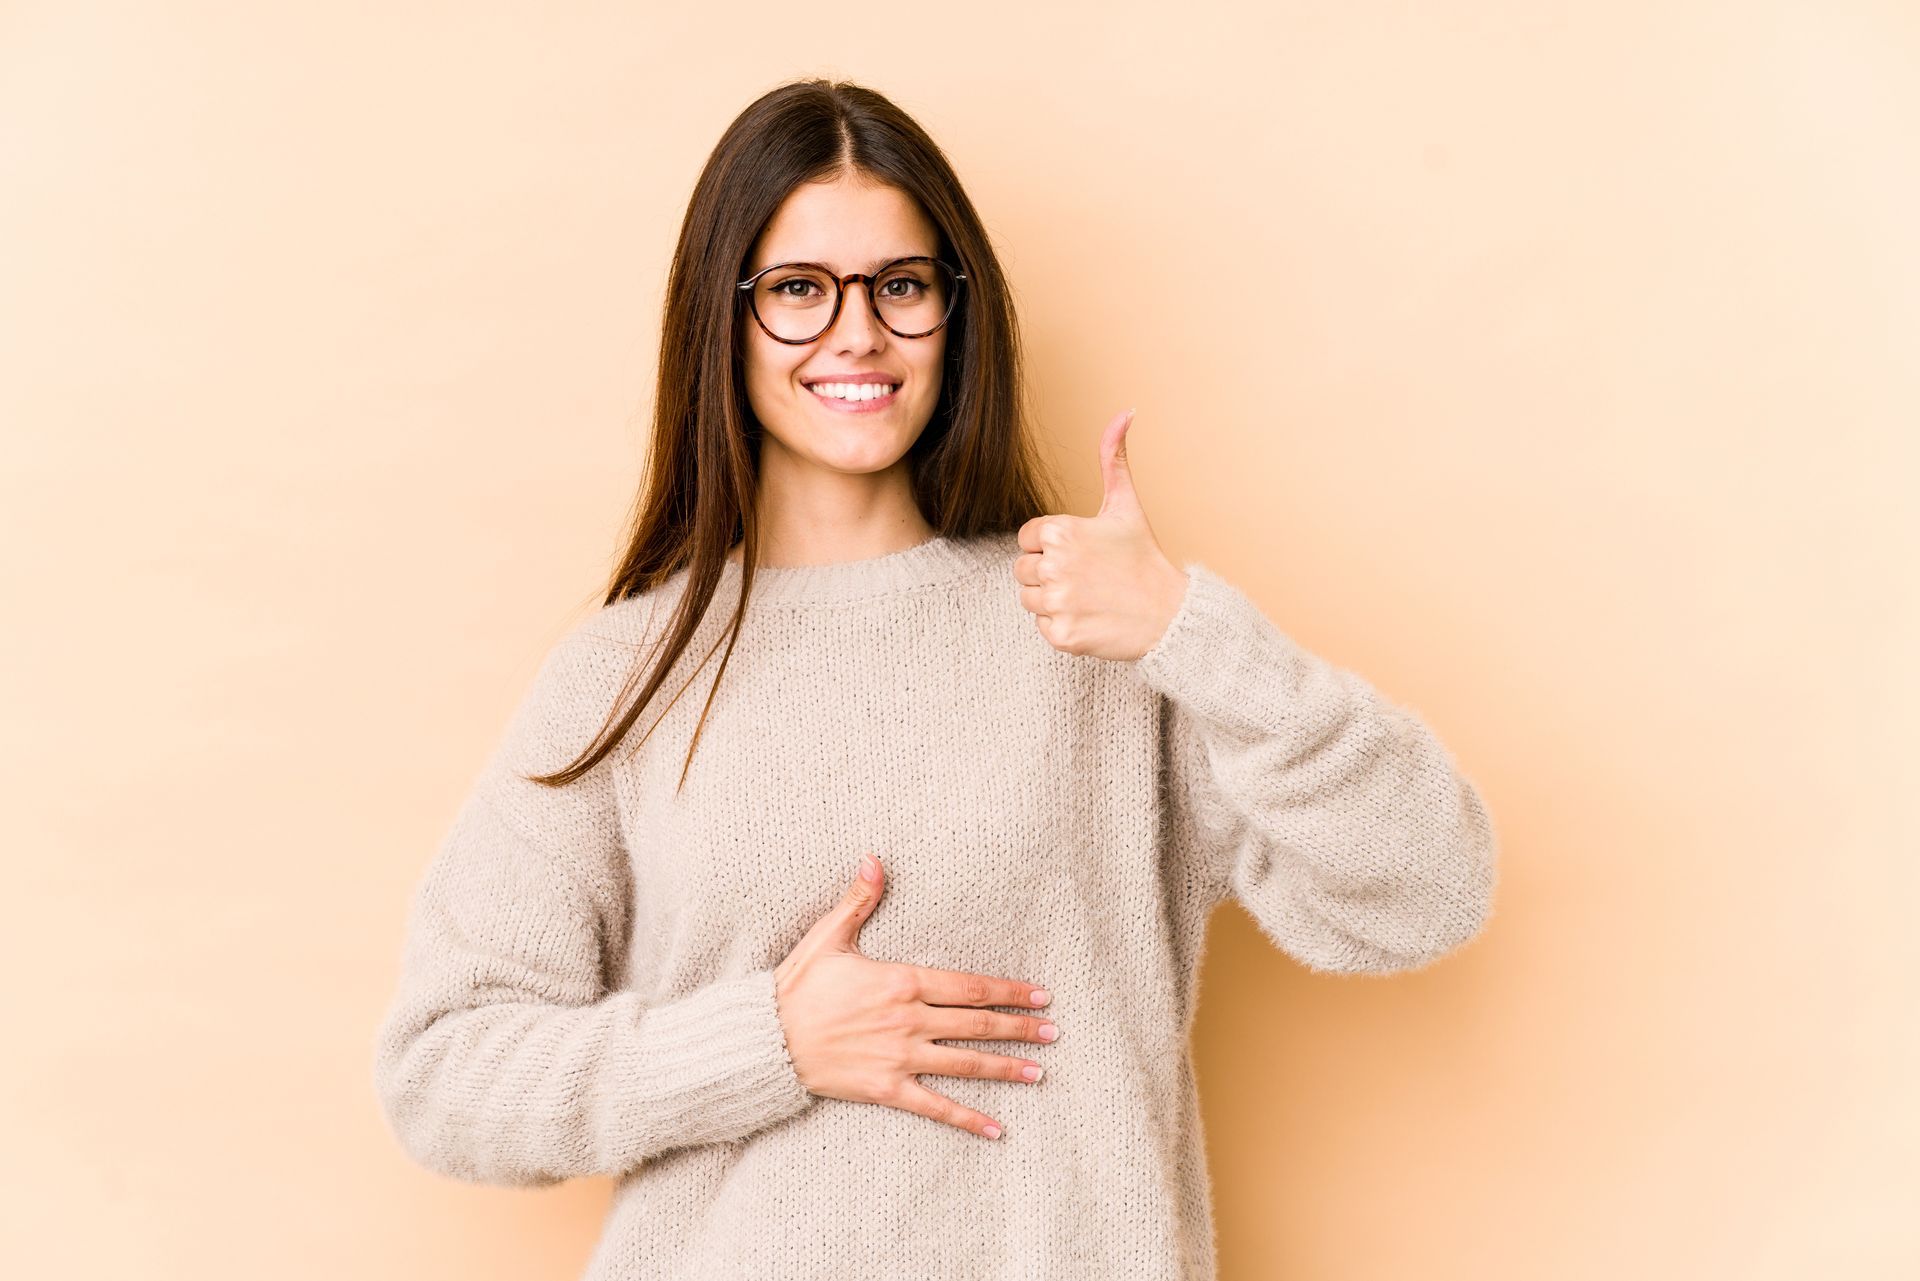 a woman wearing glasses is giving a thumbs up